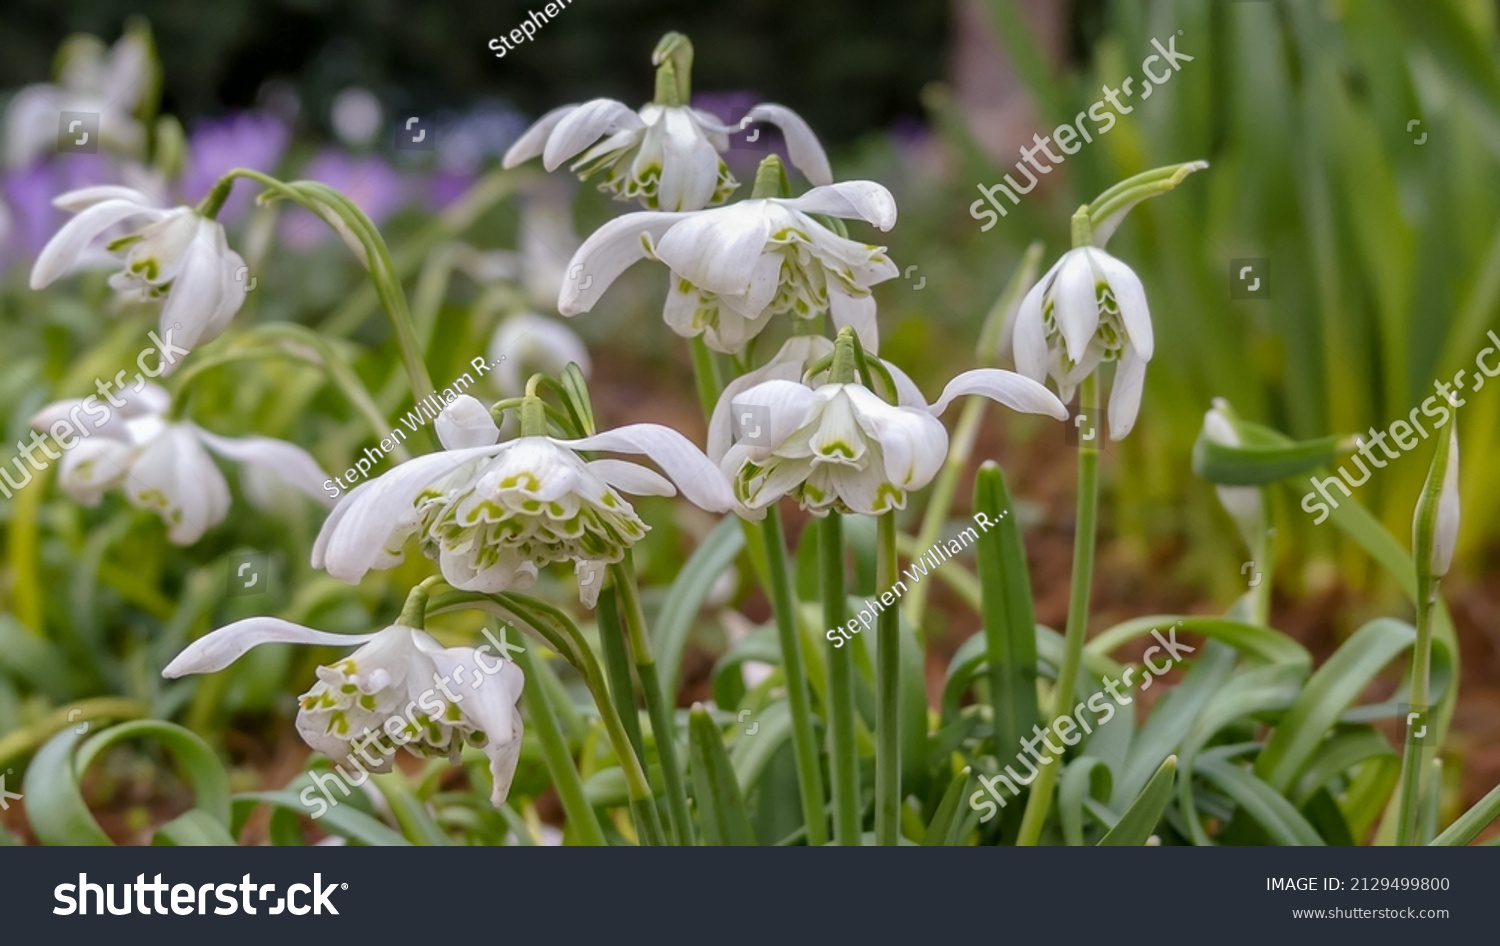 Naturally growing clump of double snowdrops (Galanthus nivalis f. pleniflorus) called Flore Pleno.  Landscape image with space for text) Selective focus on one flowerhead. England. #2129499800